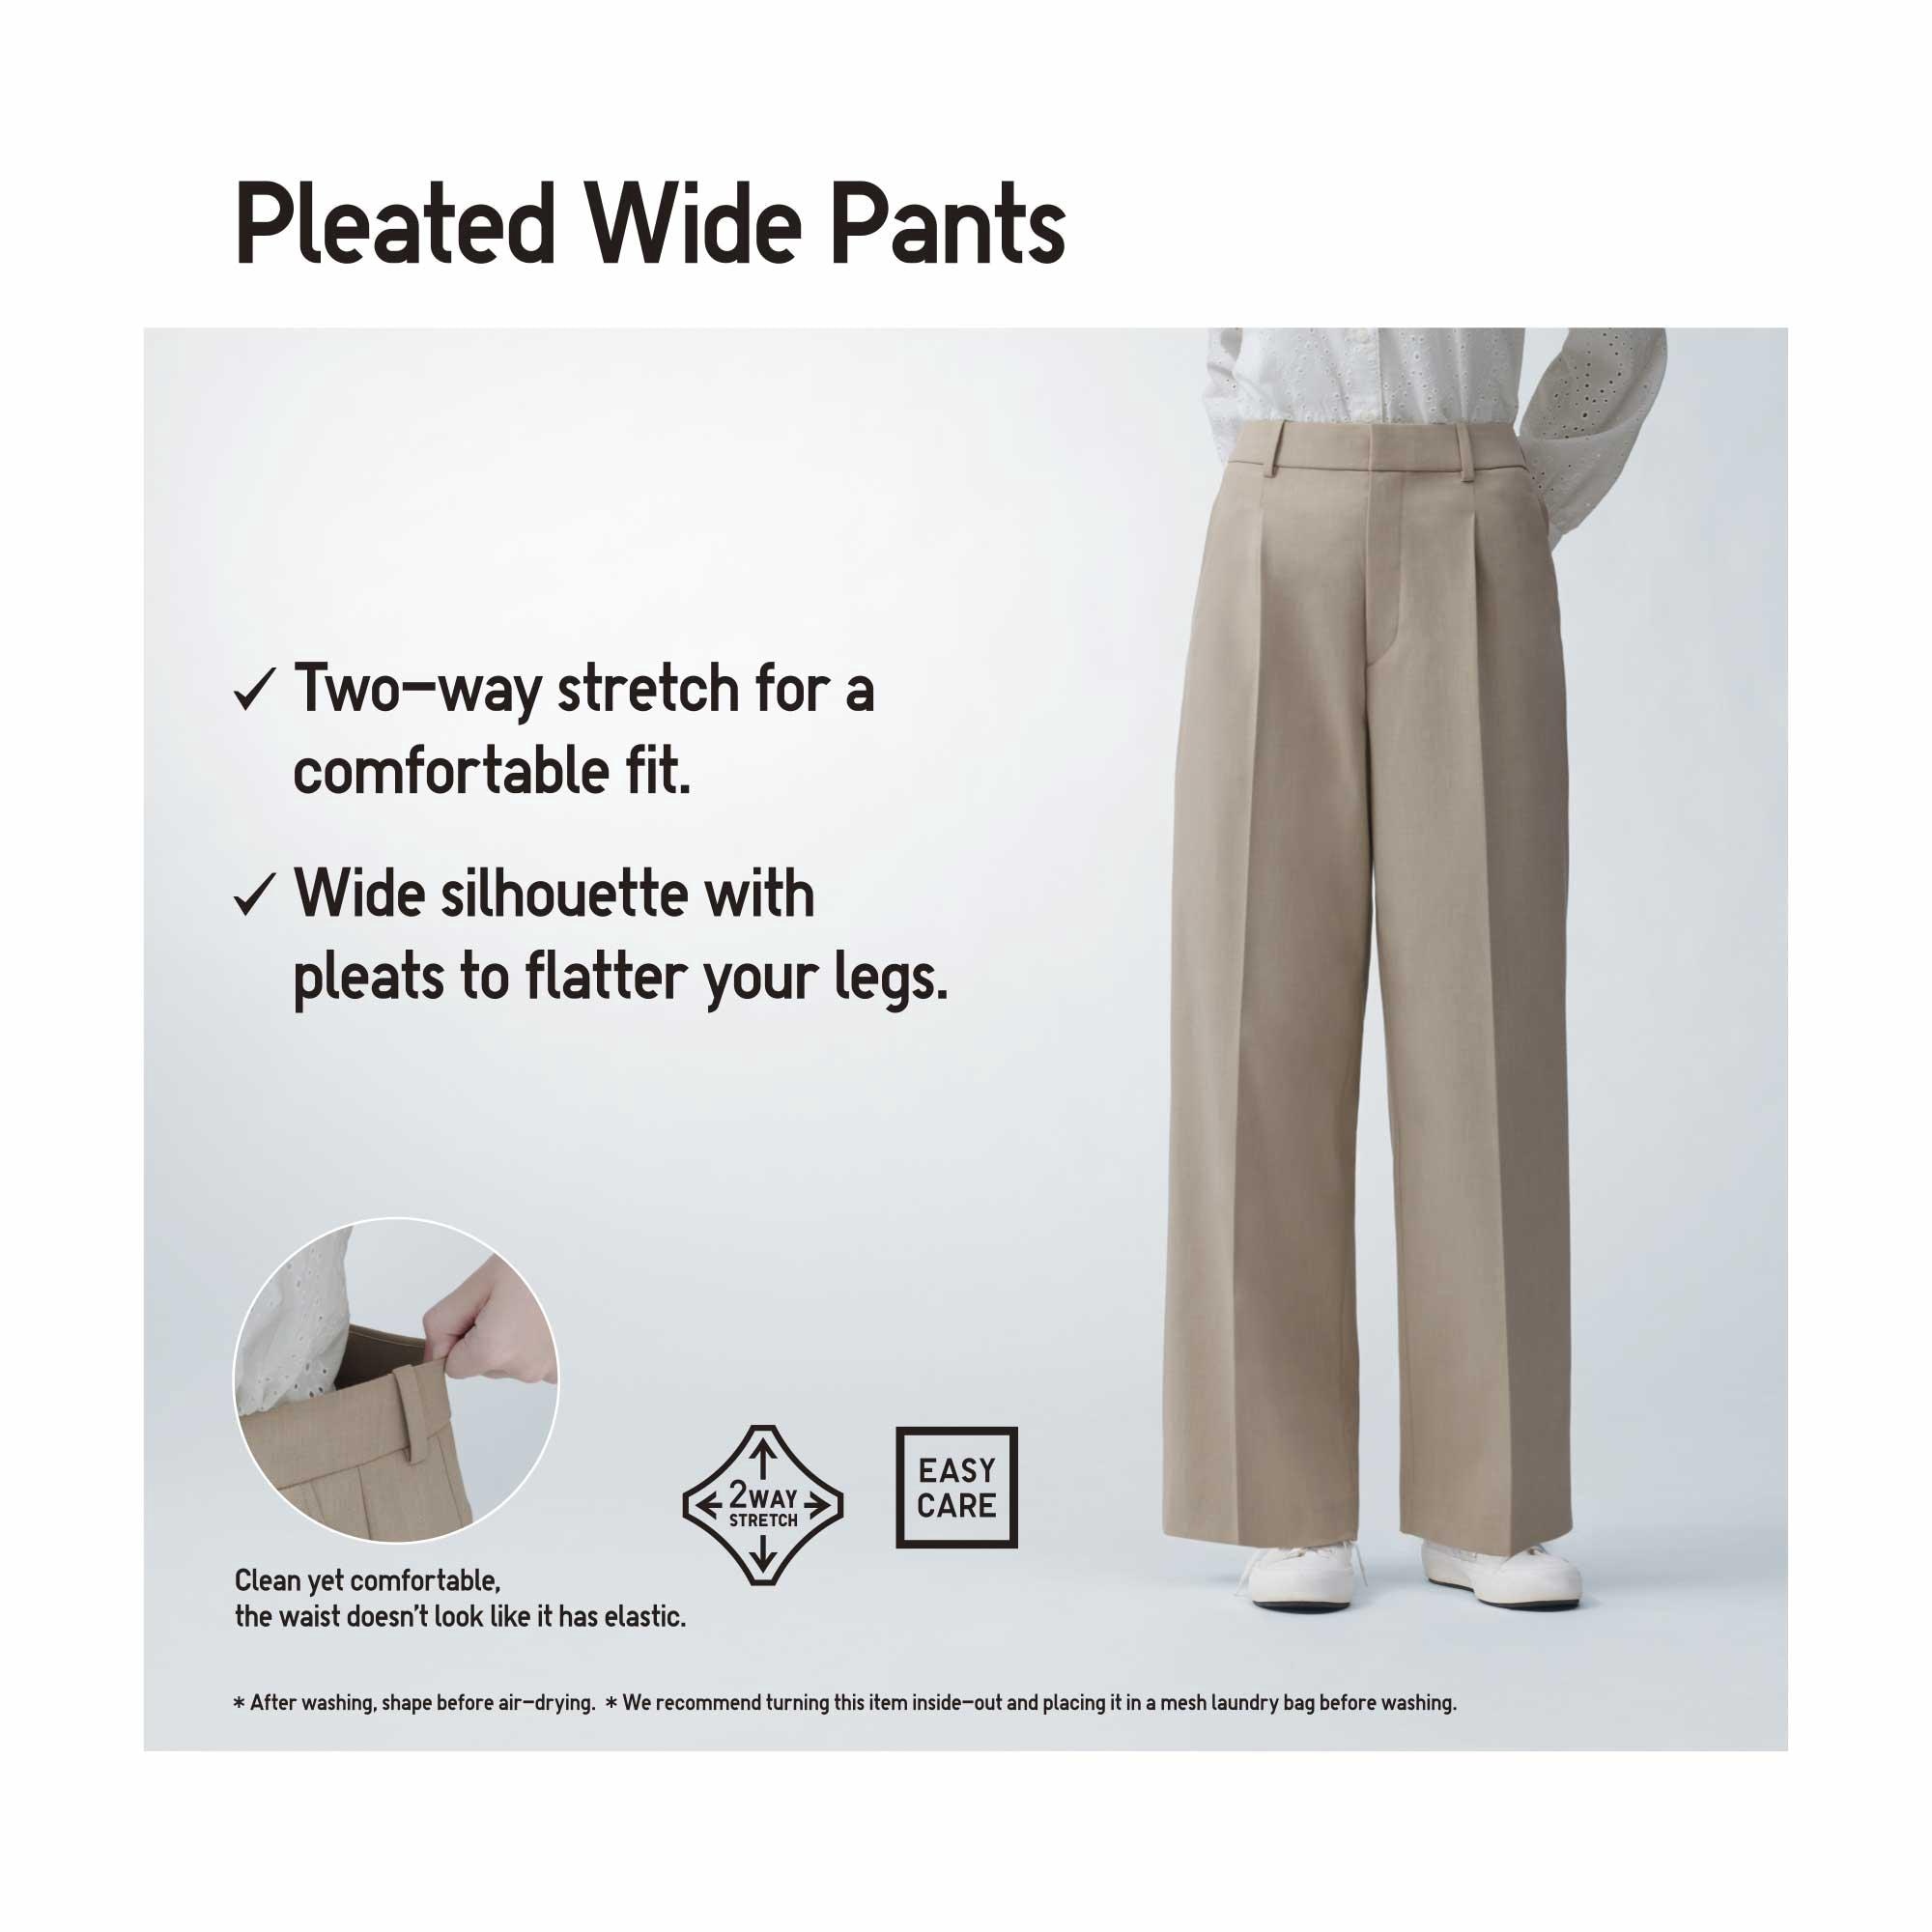 Brown tweed prince of wales double pleat cuffed Trousers